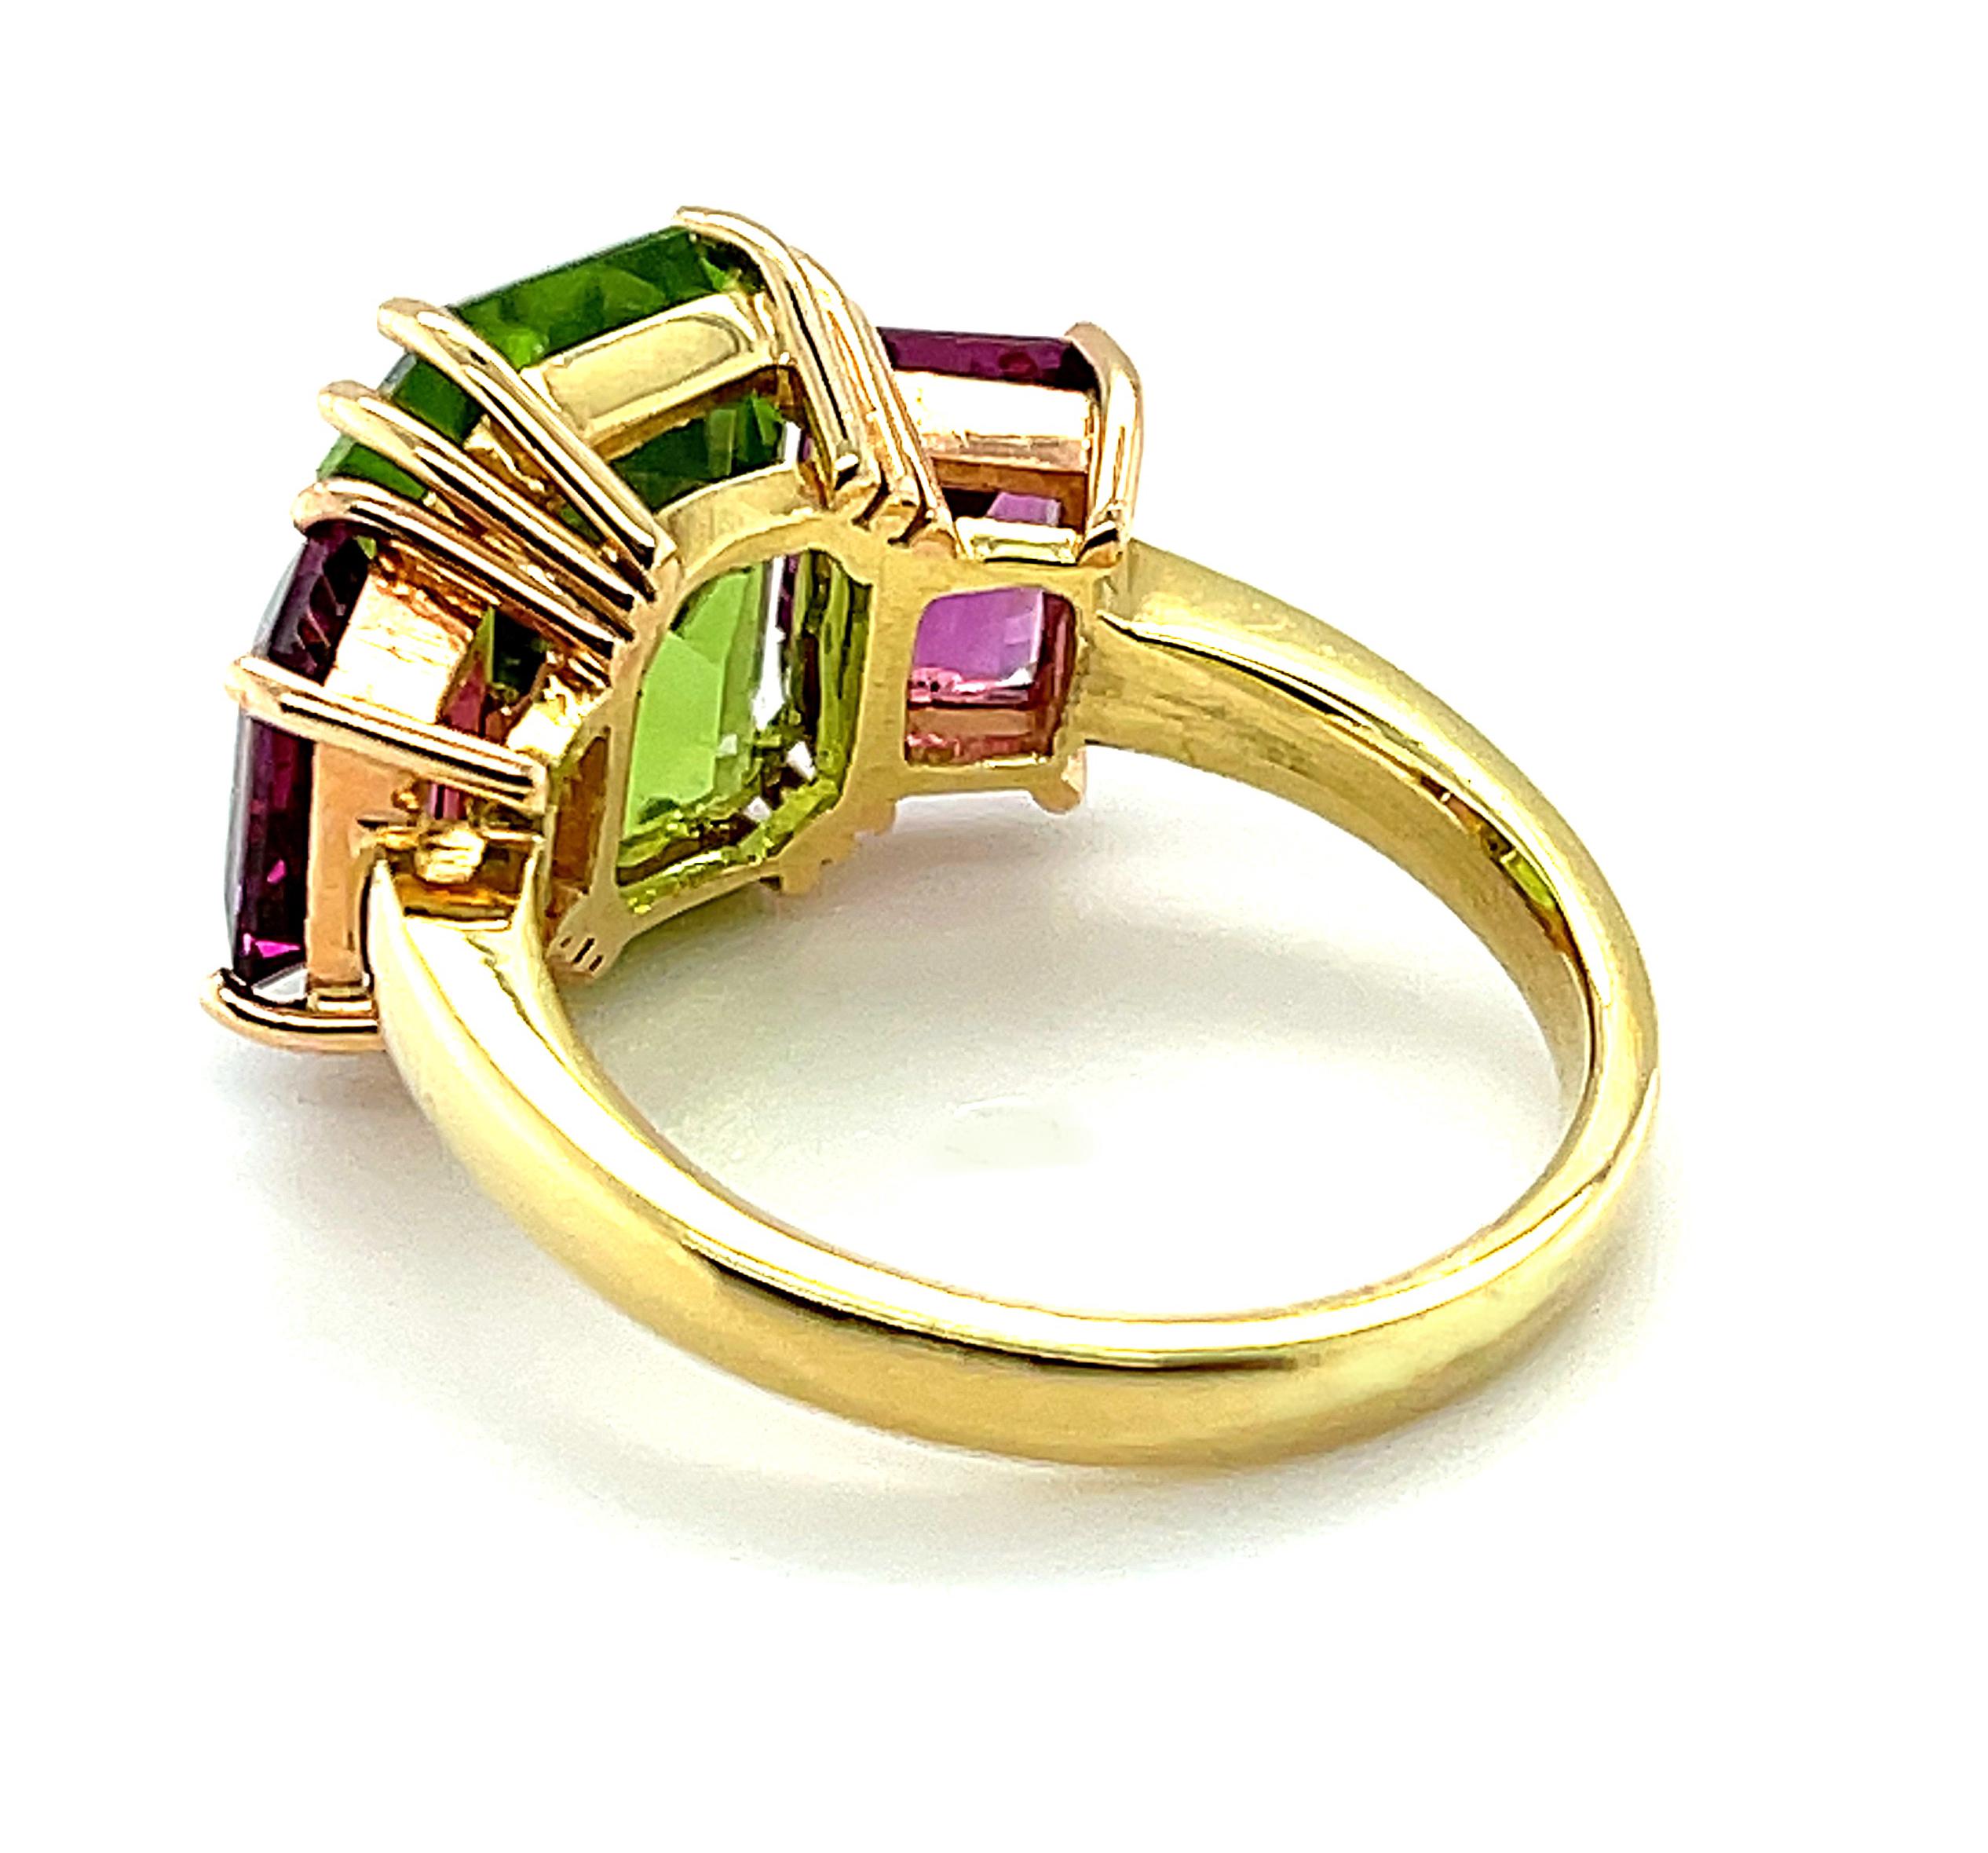 6.77 Carat Peridot and Rhodolite Garnet Cocktail Ring in Yellow and Rose Gold   In New Condition For Sale In Los Angeles, CA